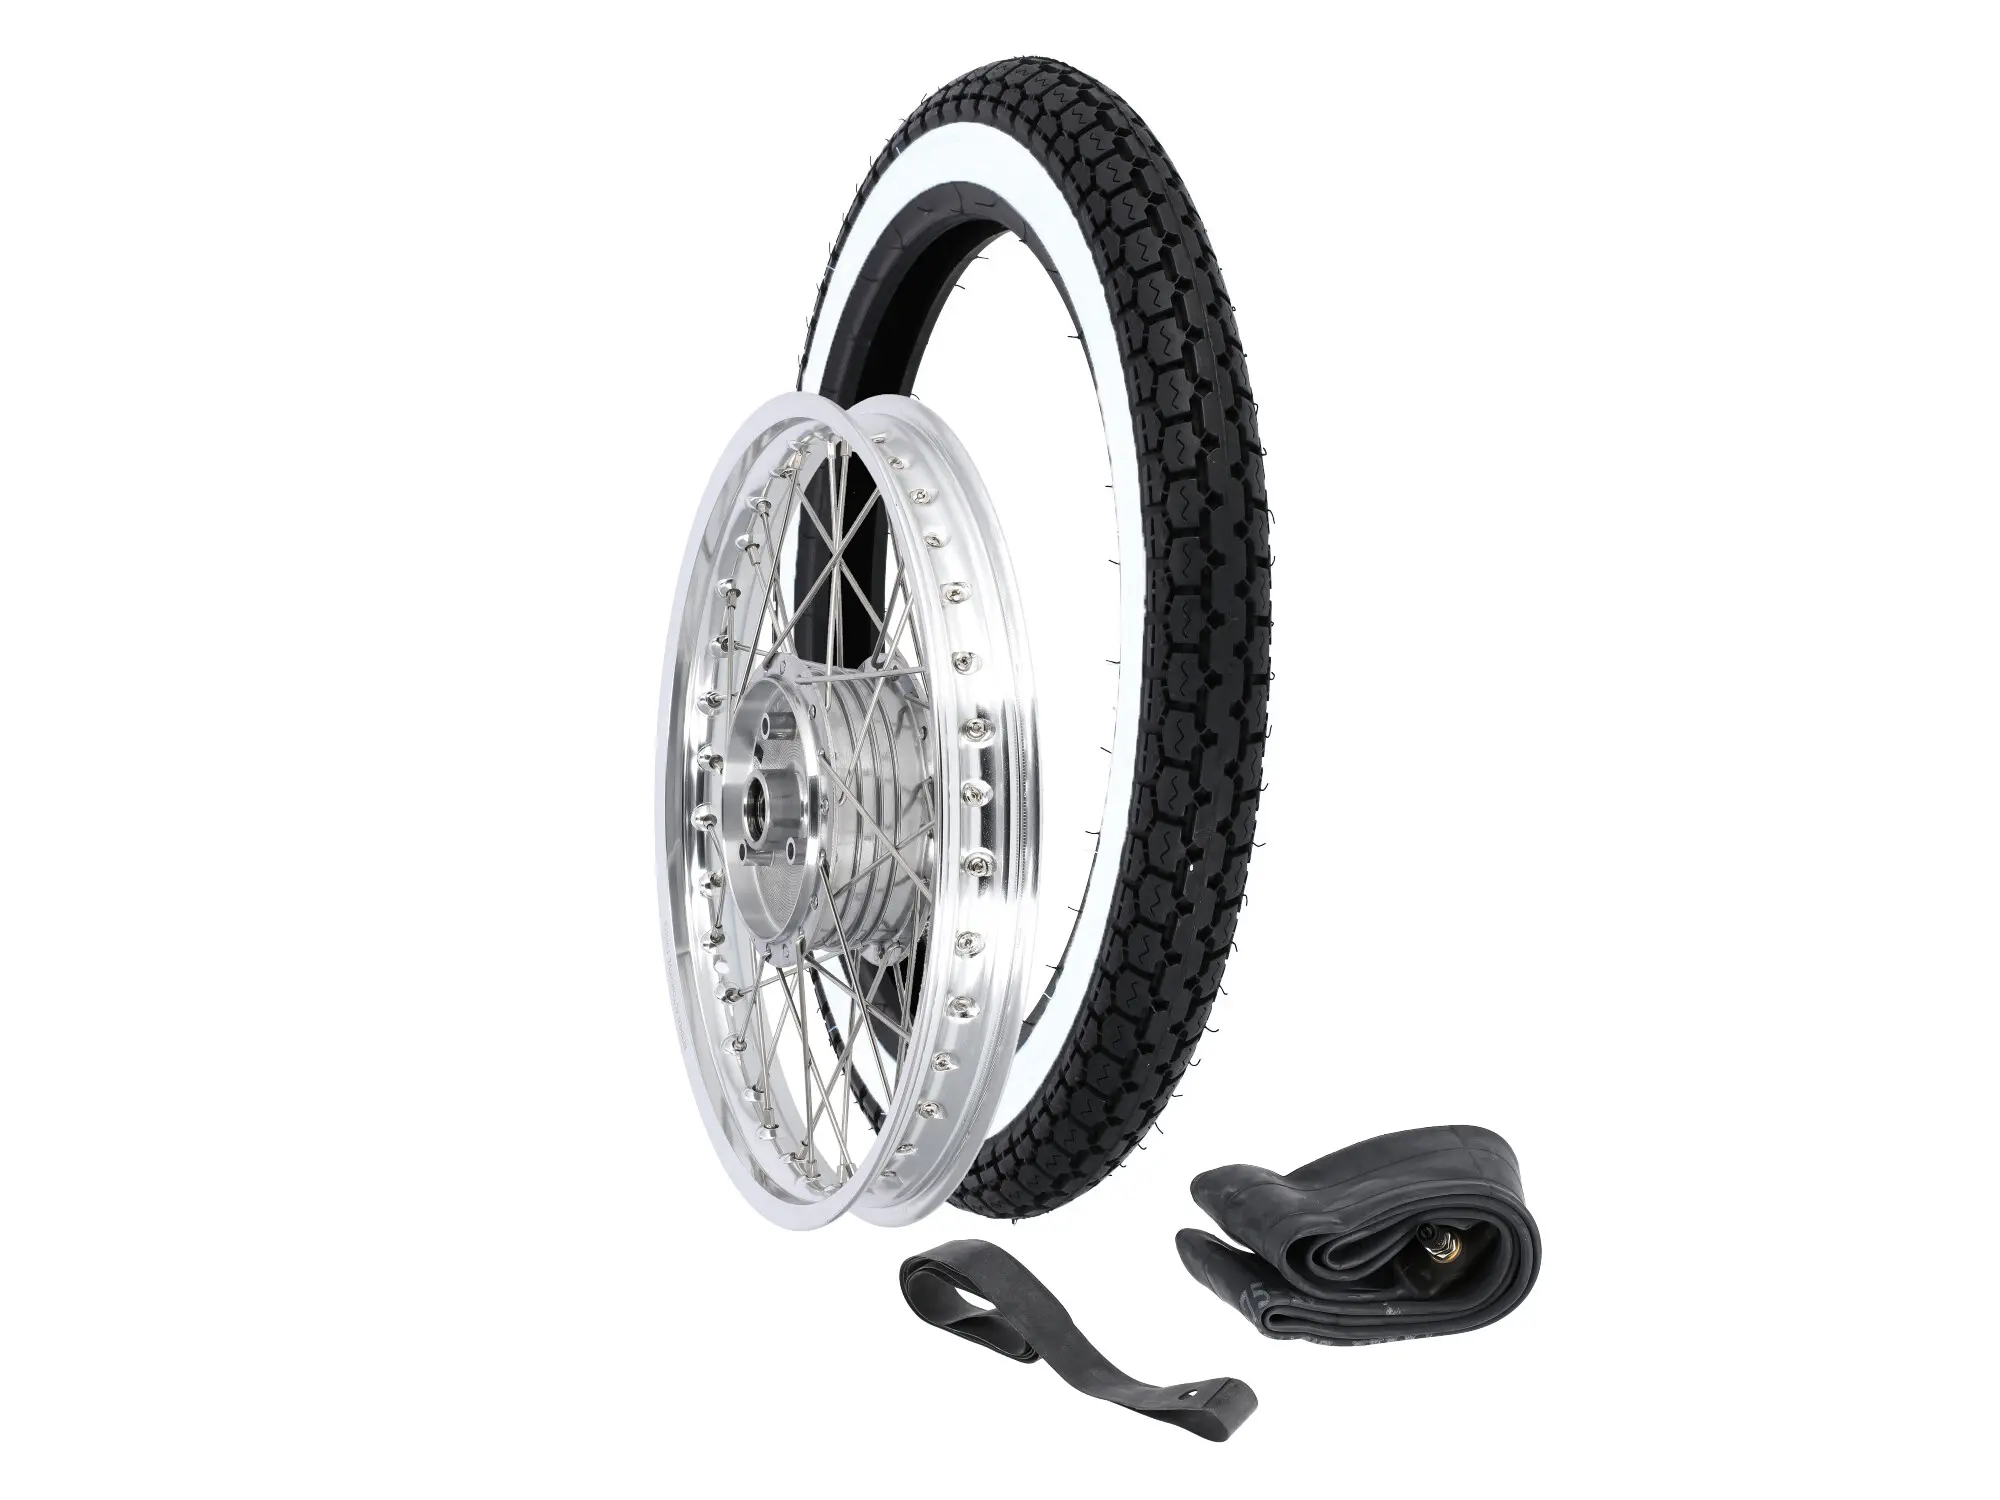 Complete wheel unmounted 1,5x16" alloy rim + stainless steel spokes + whitewall tire IRC NR-2, Item no: GP10000596 - Image 1